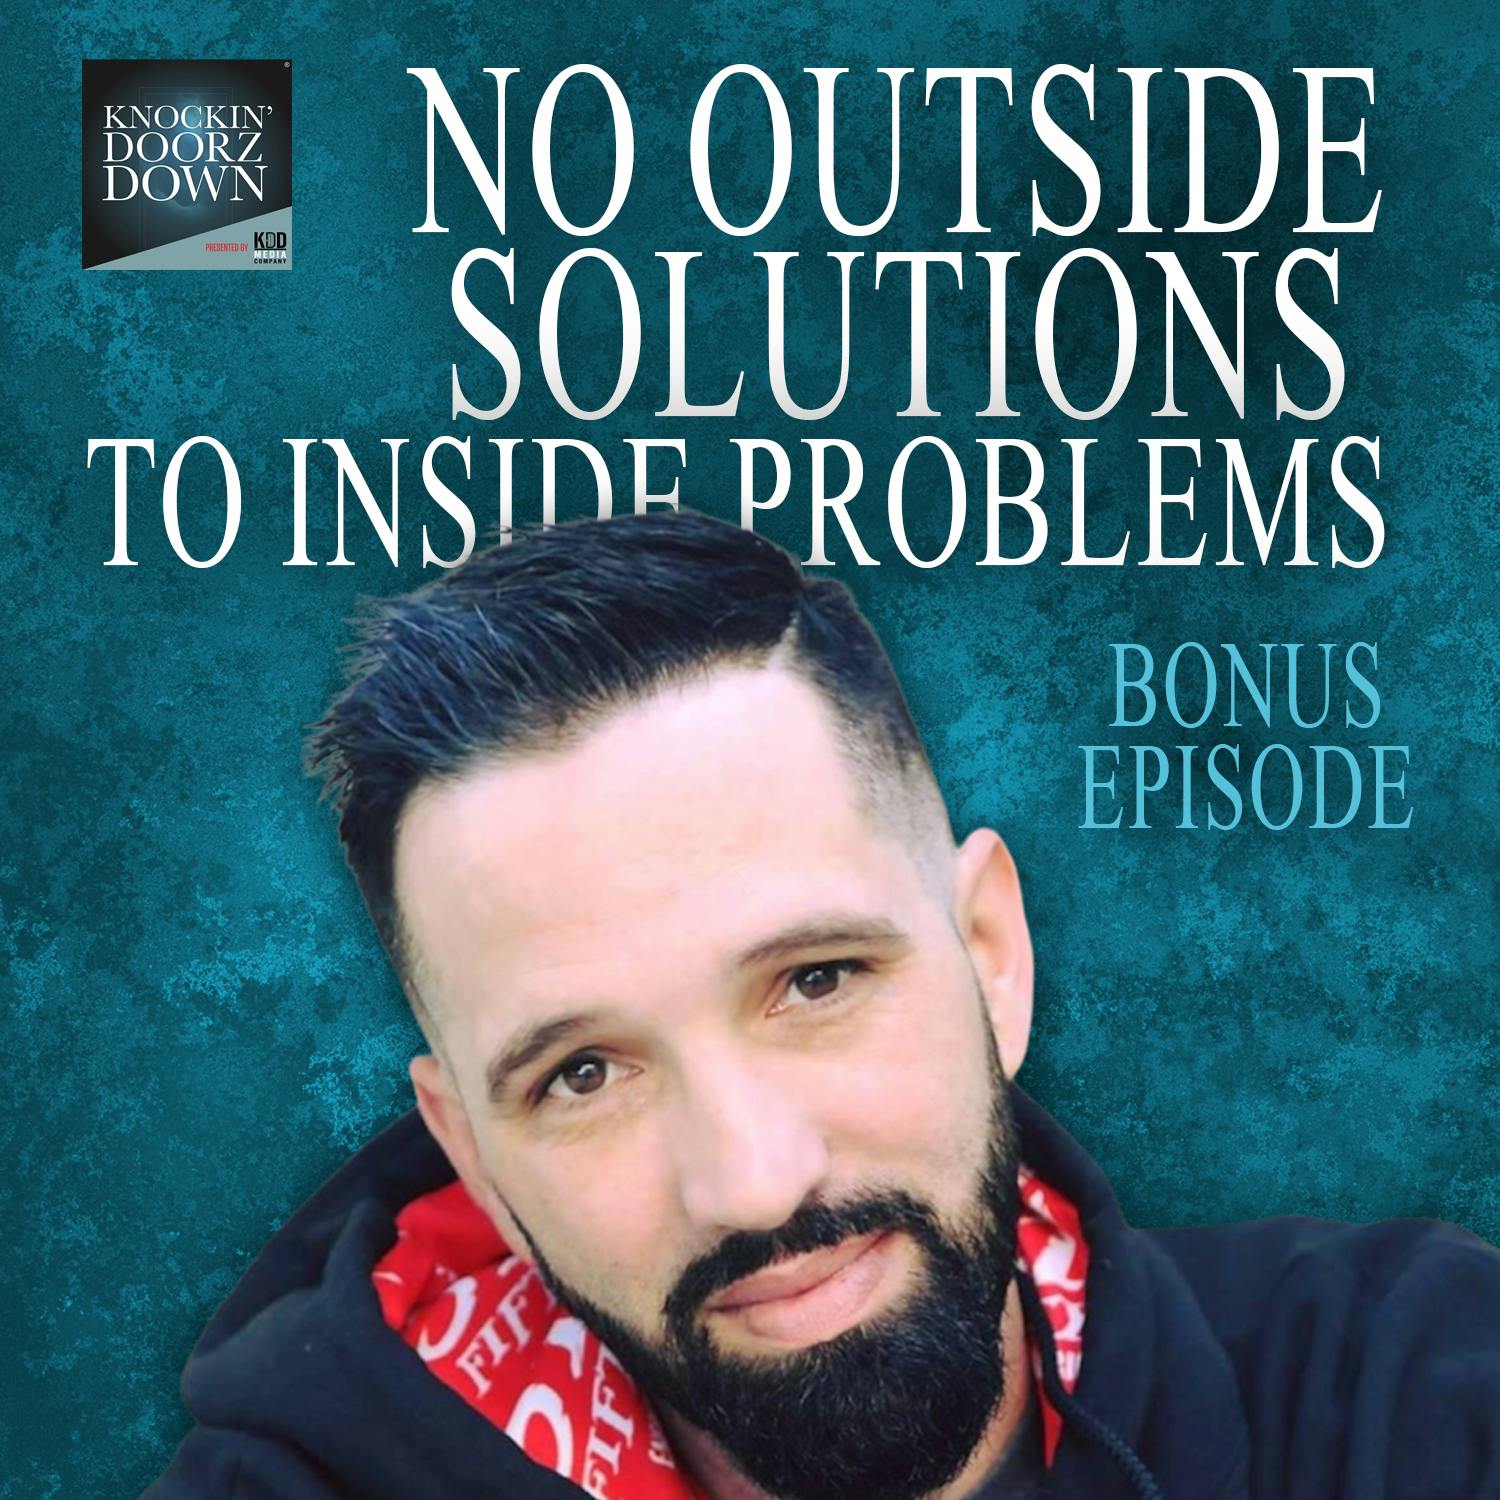 No Outside Solutions To Inside Problems. What Does That Mean to Me?